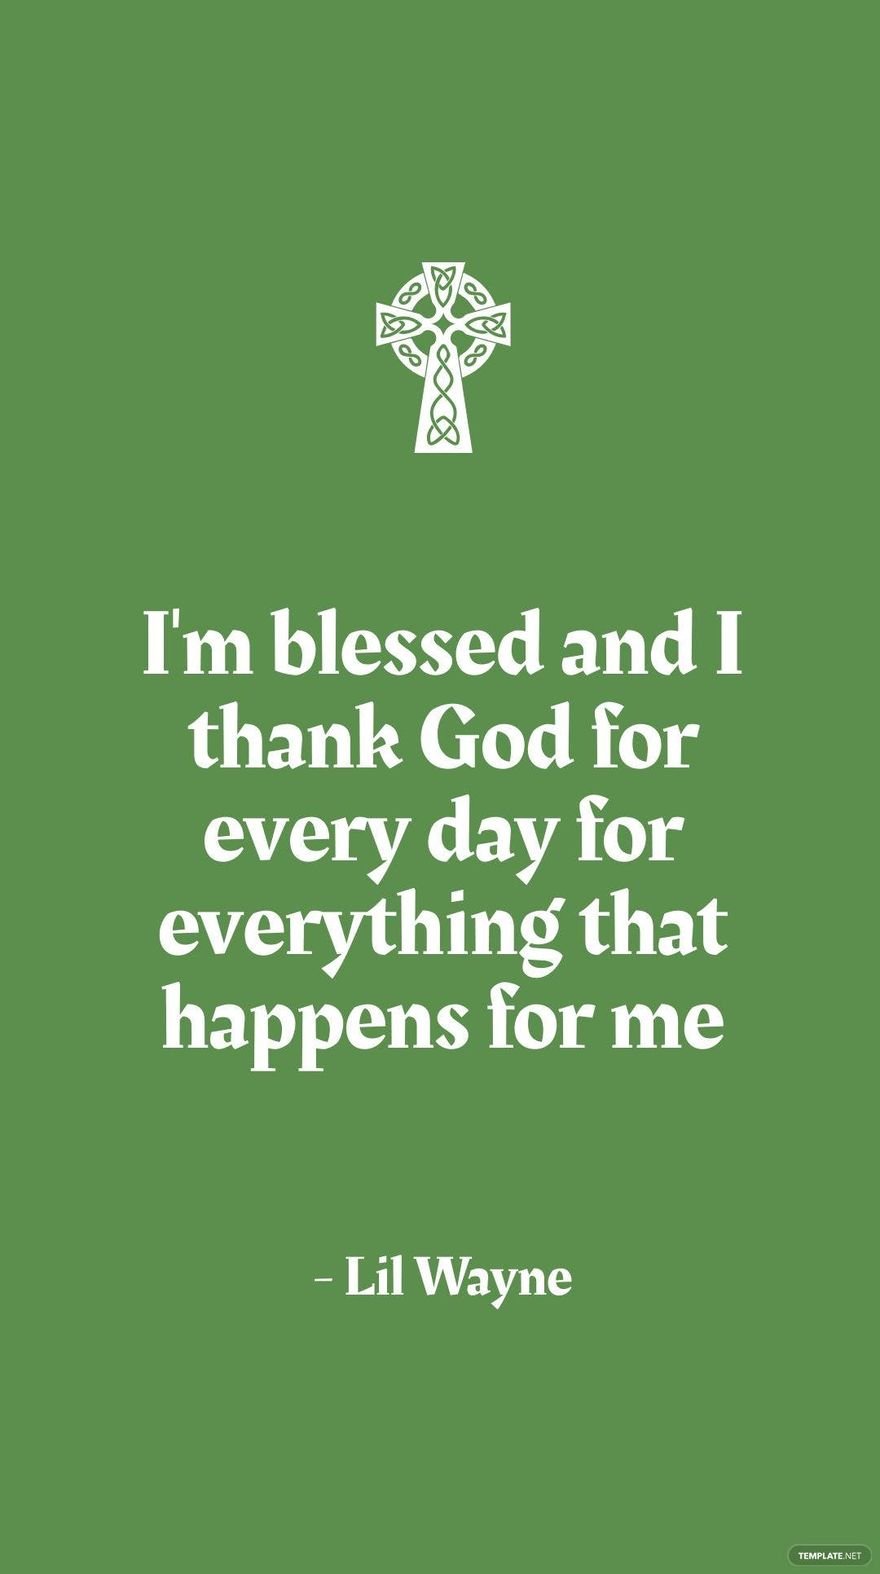 Lil Wayne - I'm blessed and I thank God for every day for everything that happens for me